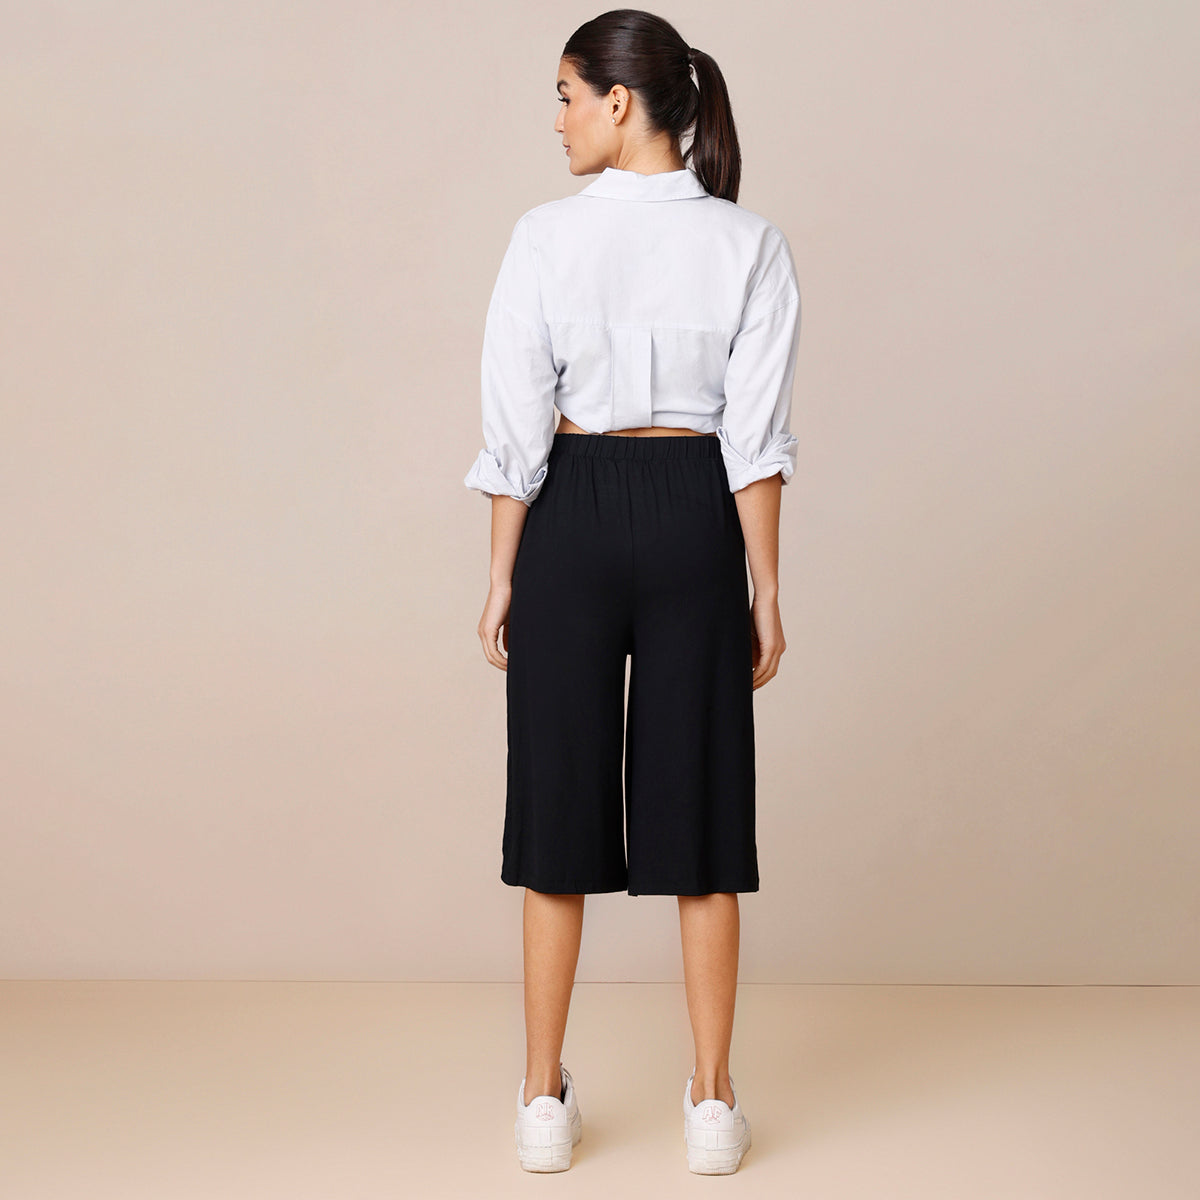 Nykd All Day Sooo Comfy Super Soft Modal Lounge Culottes-NYLE059 Anthracite